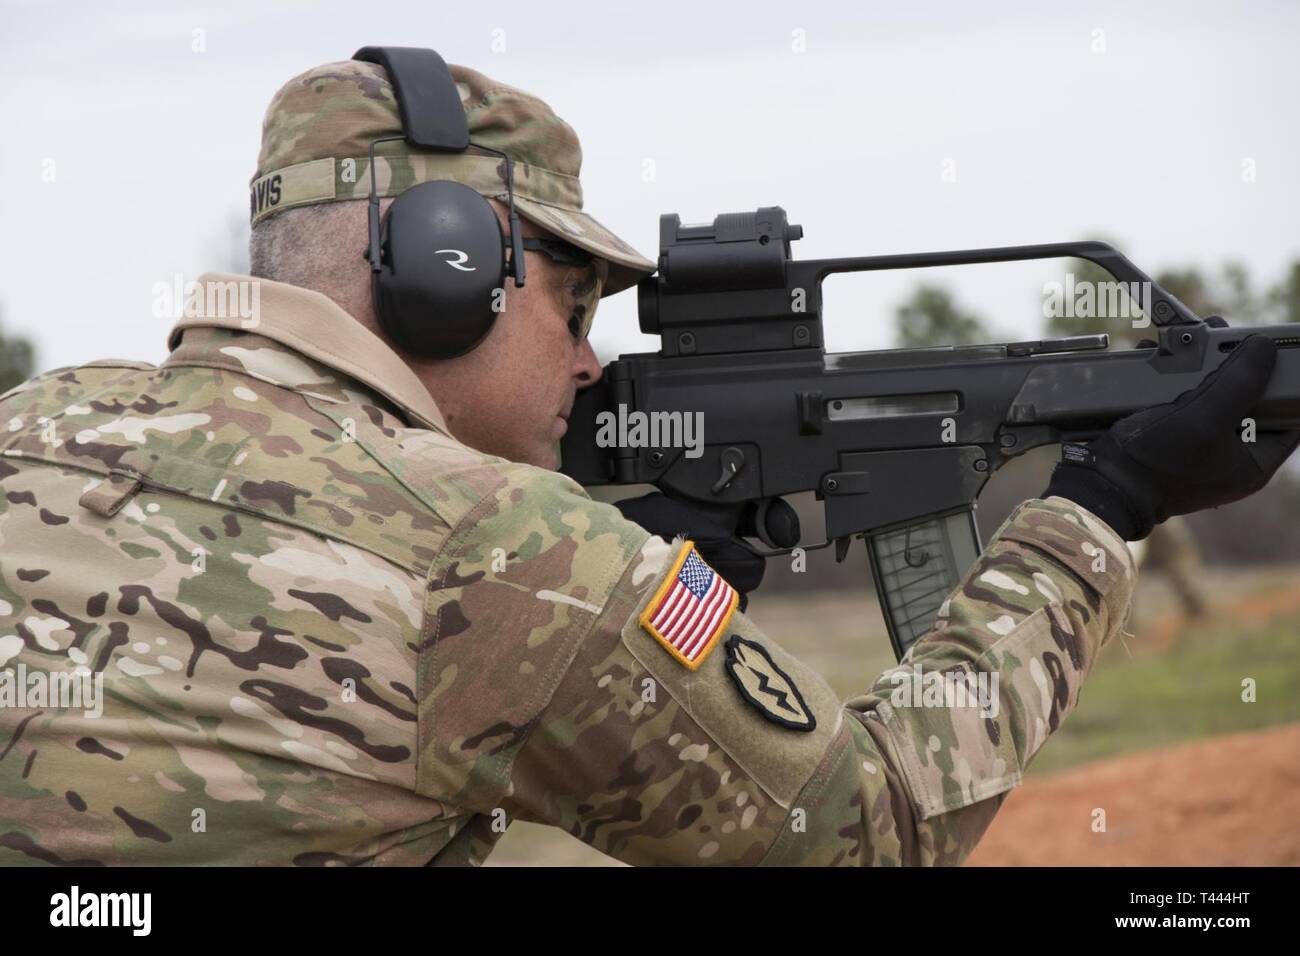 U.S. Army Brig. Gen. Ray Davis, National Guard Bureau, Army National Guard  Assistant Director of Aviation and Safety, fires the G36 rifle during the  German Armed Forces Proficiency Badge qualification, March 16,